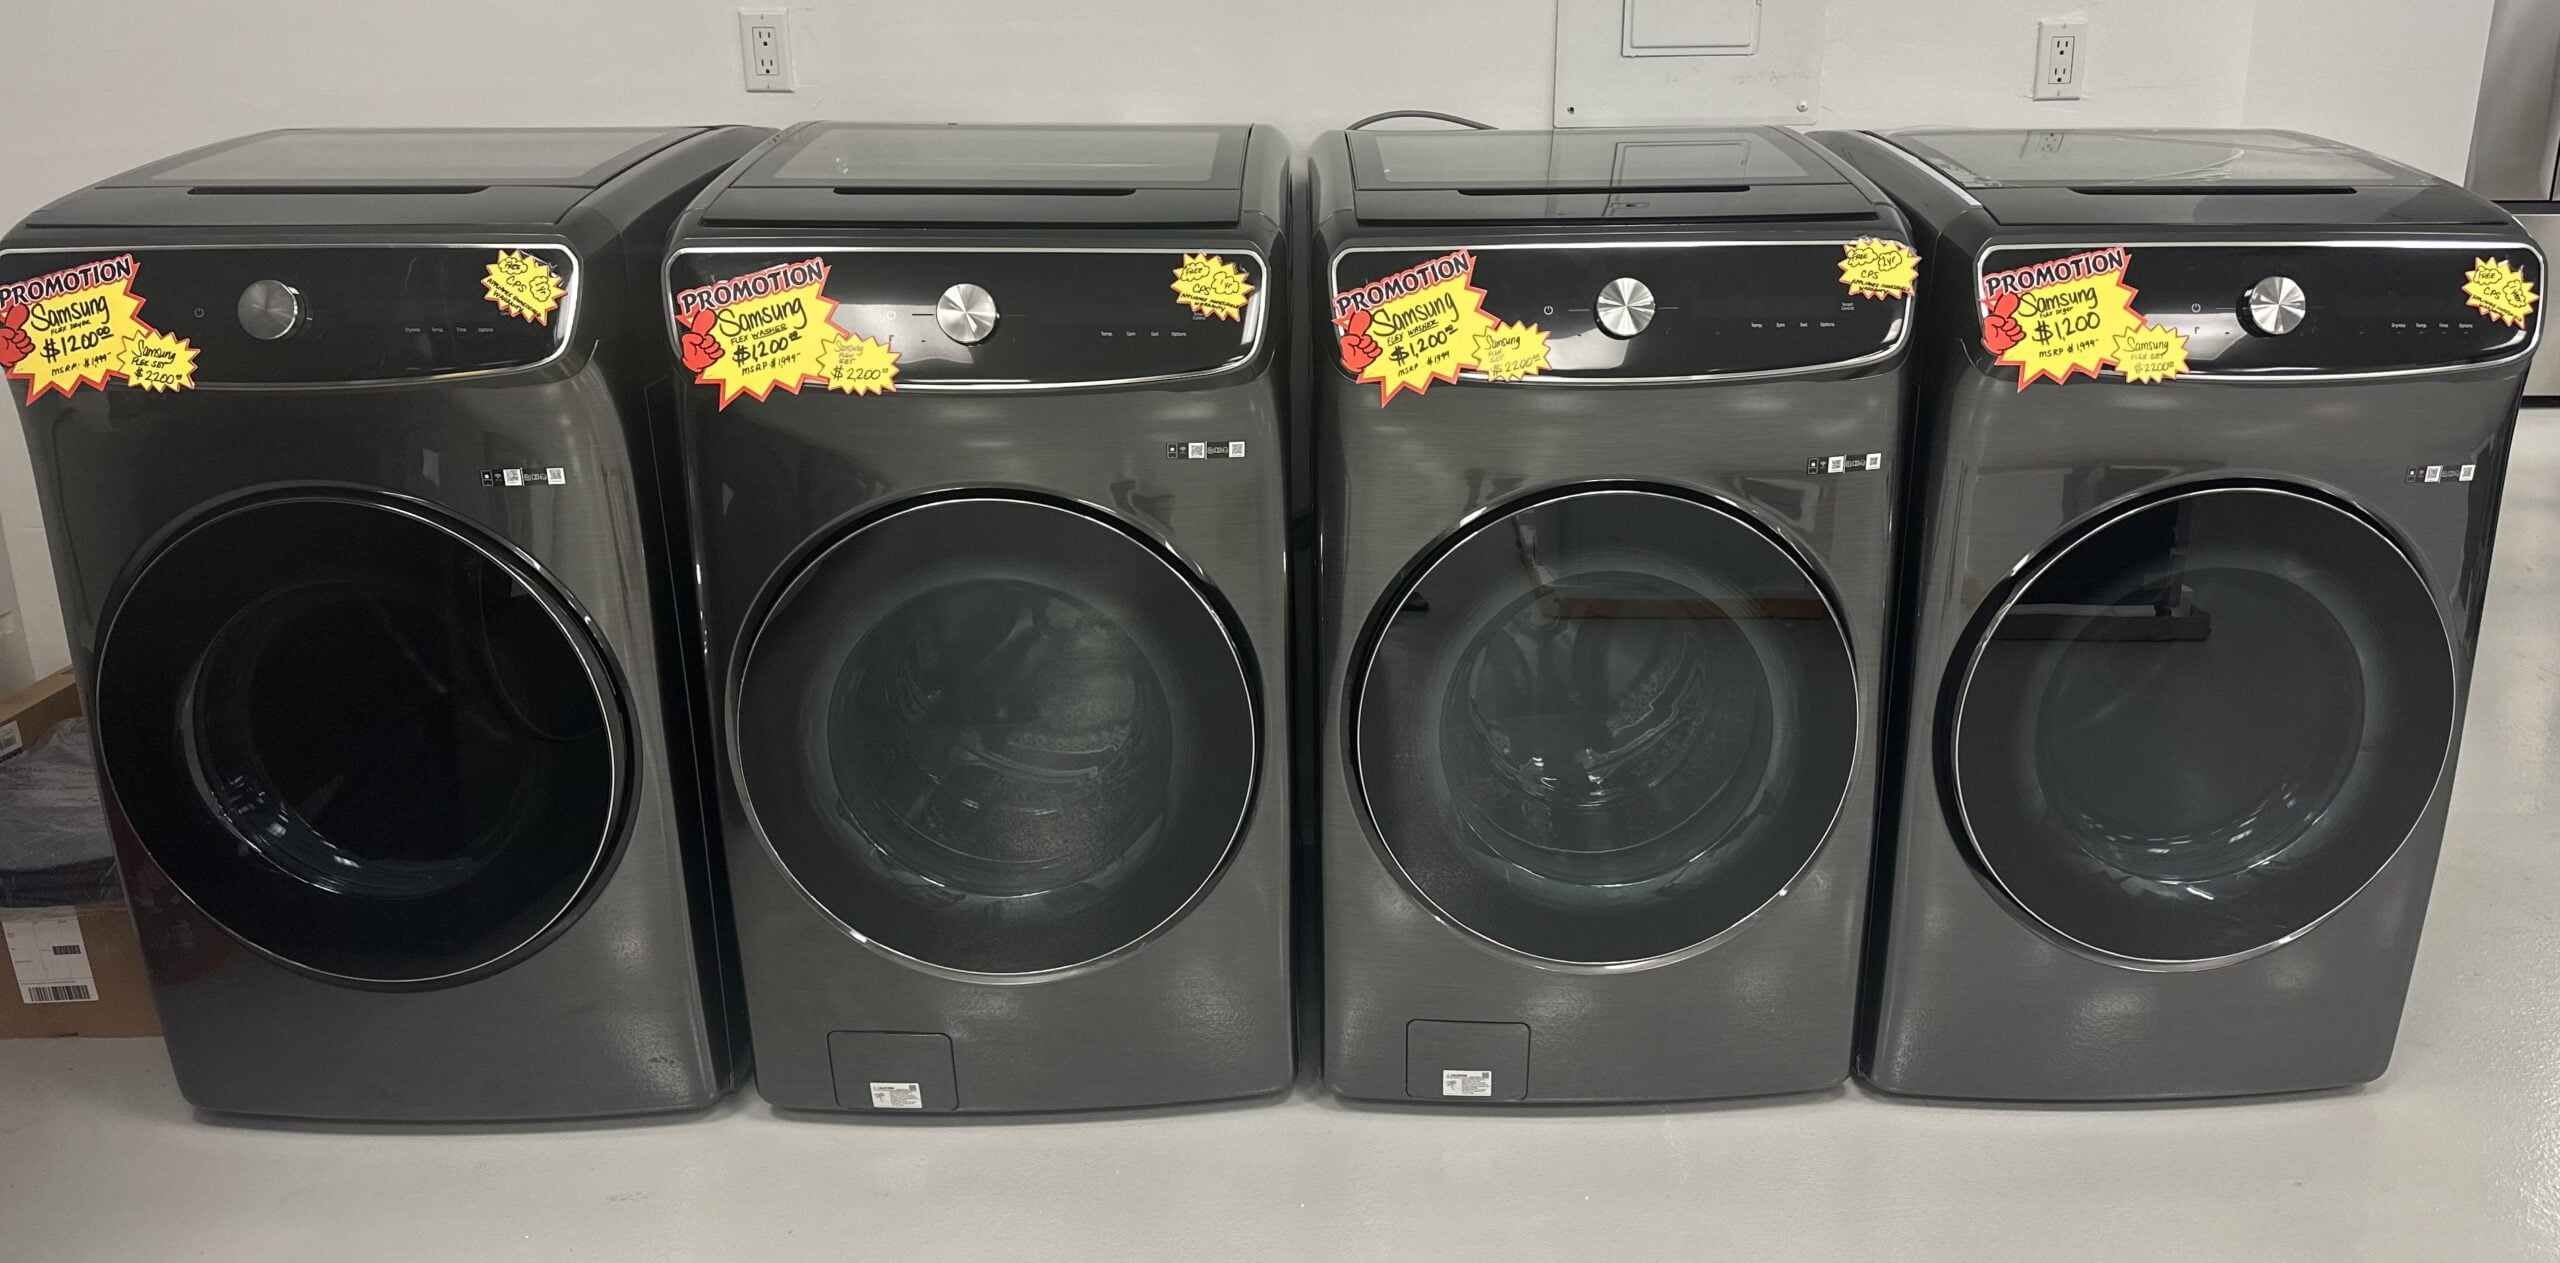 Discounted dryers | cheap dryers | affordable appliances